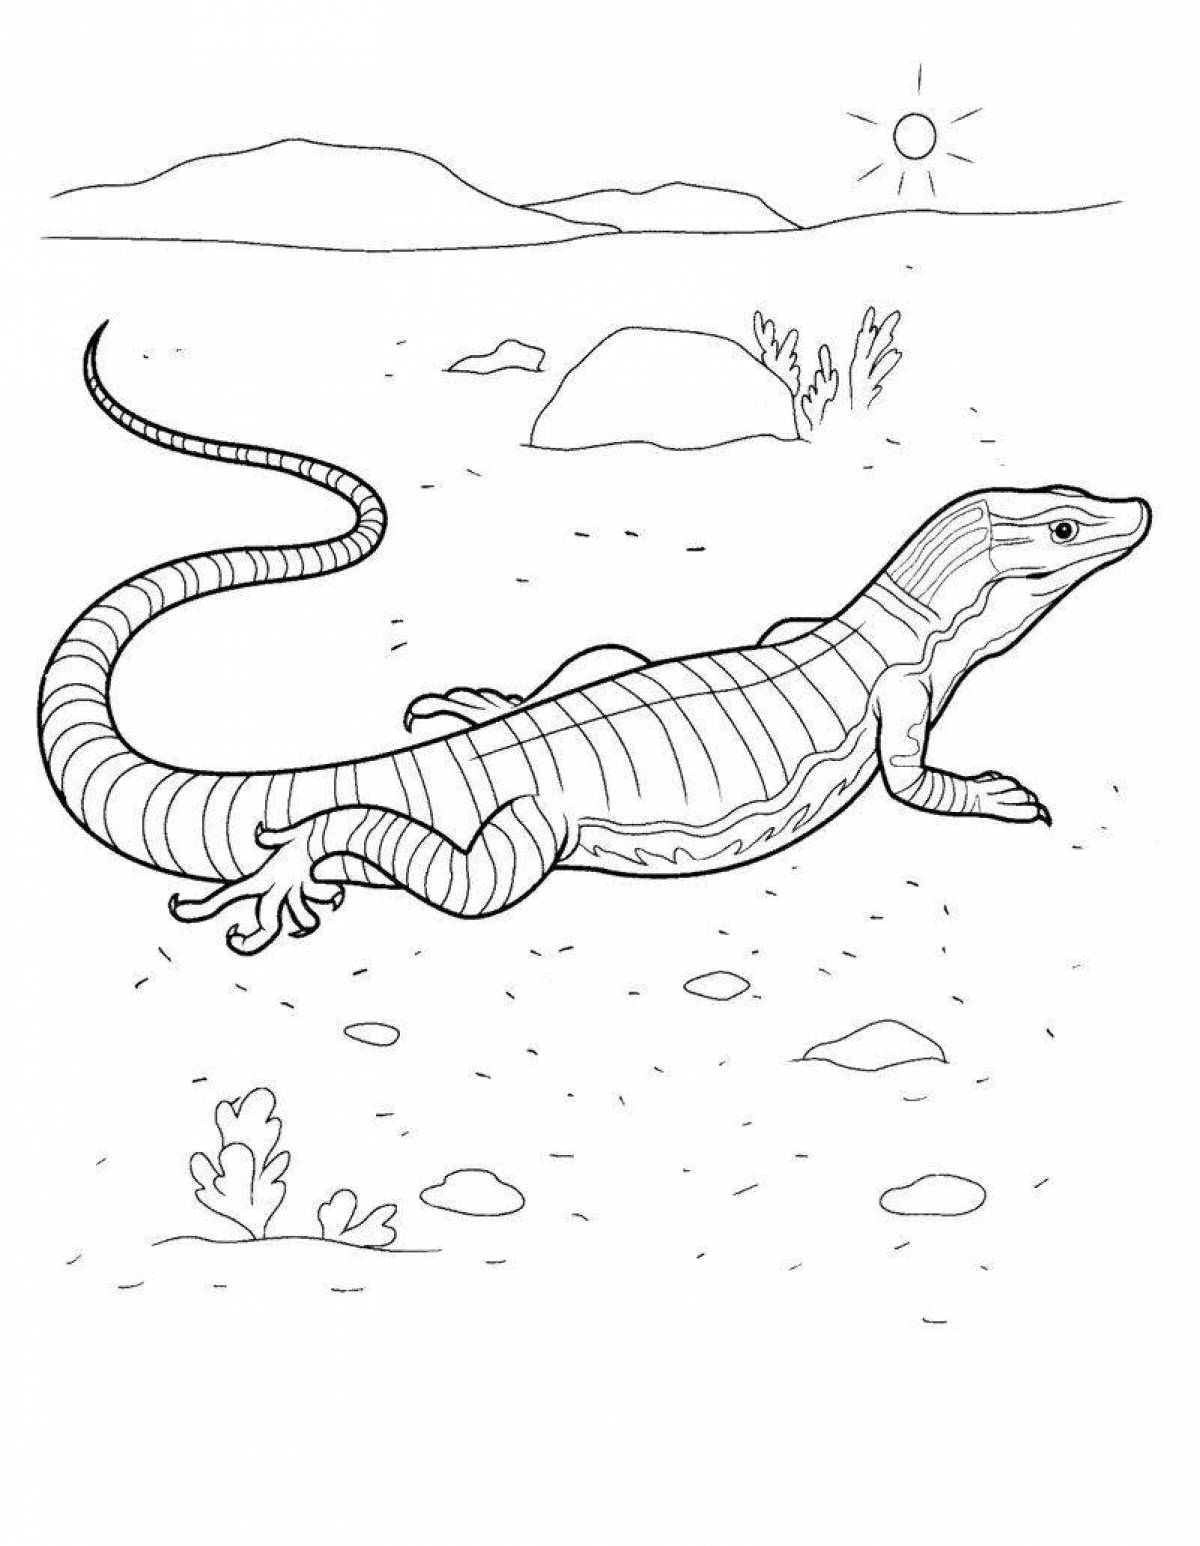 Living monitor lizard coloring book for babies